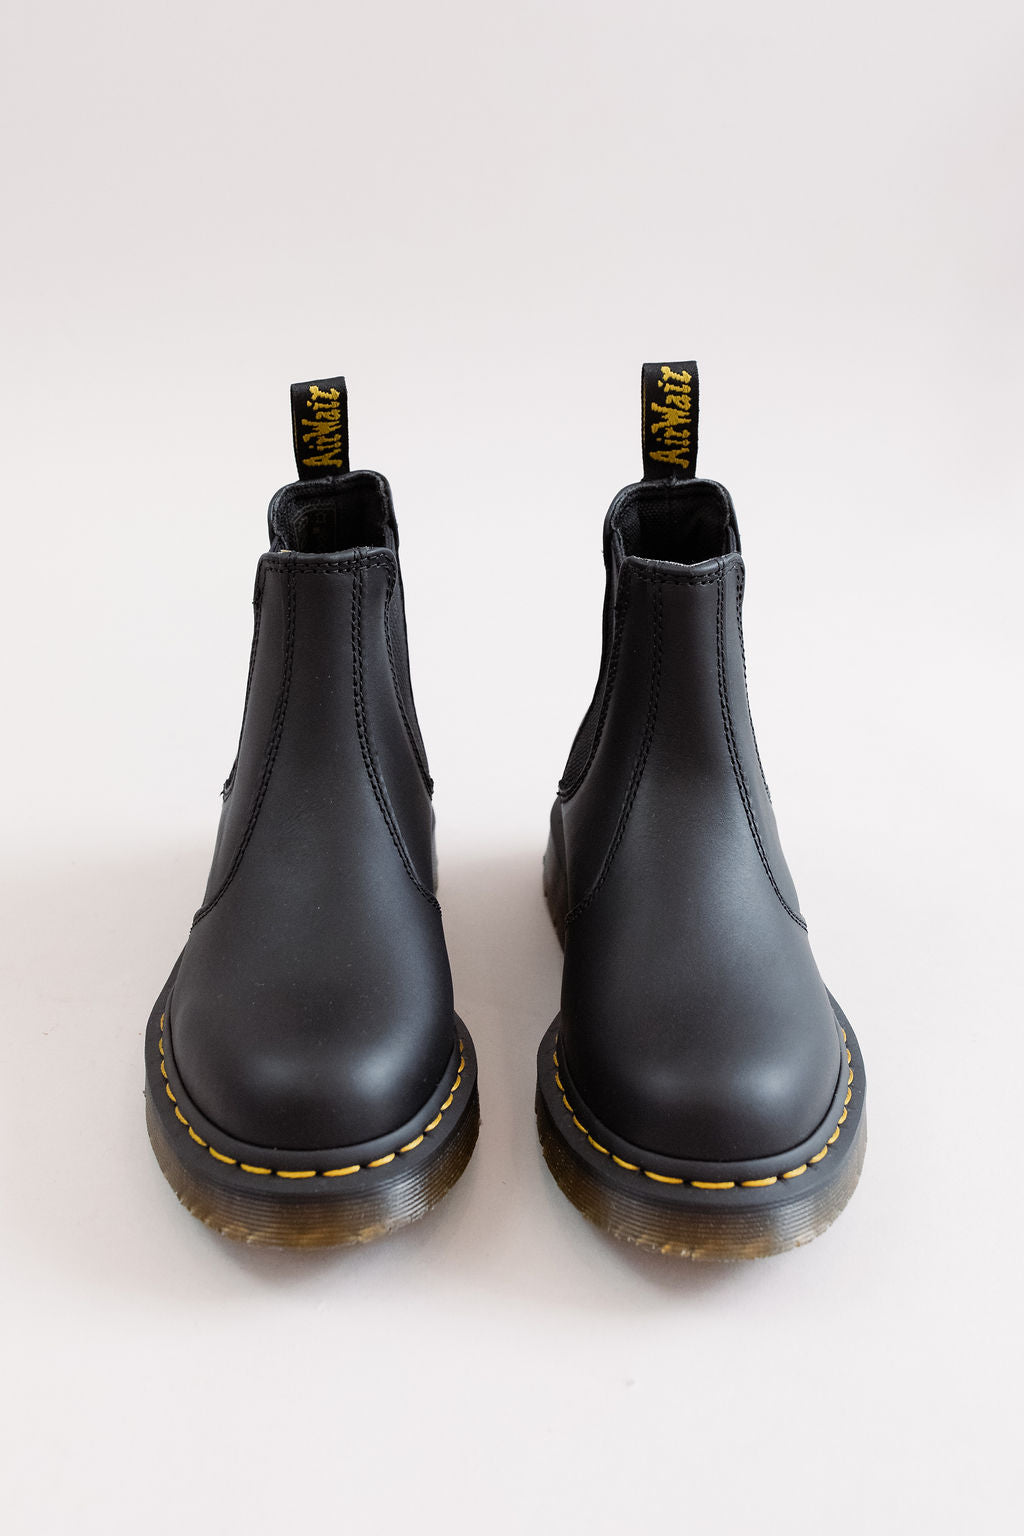 Dr. Martens | 2976 SR Leather Chelsea Boot | Black - Poppy and Stella